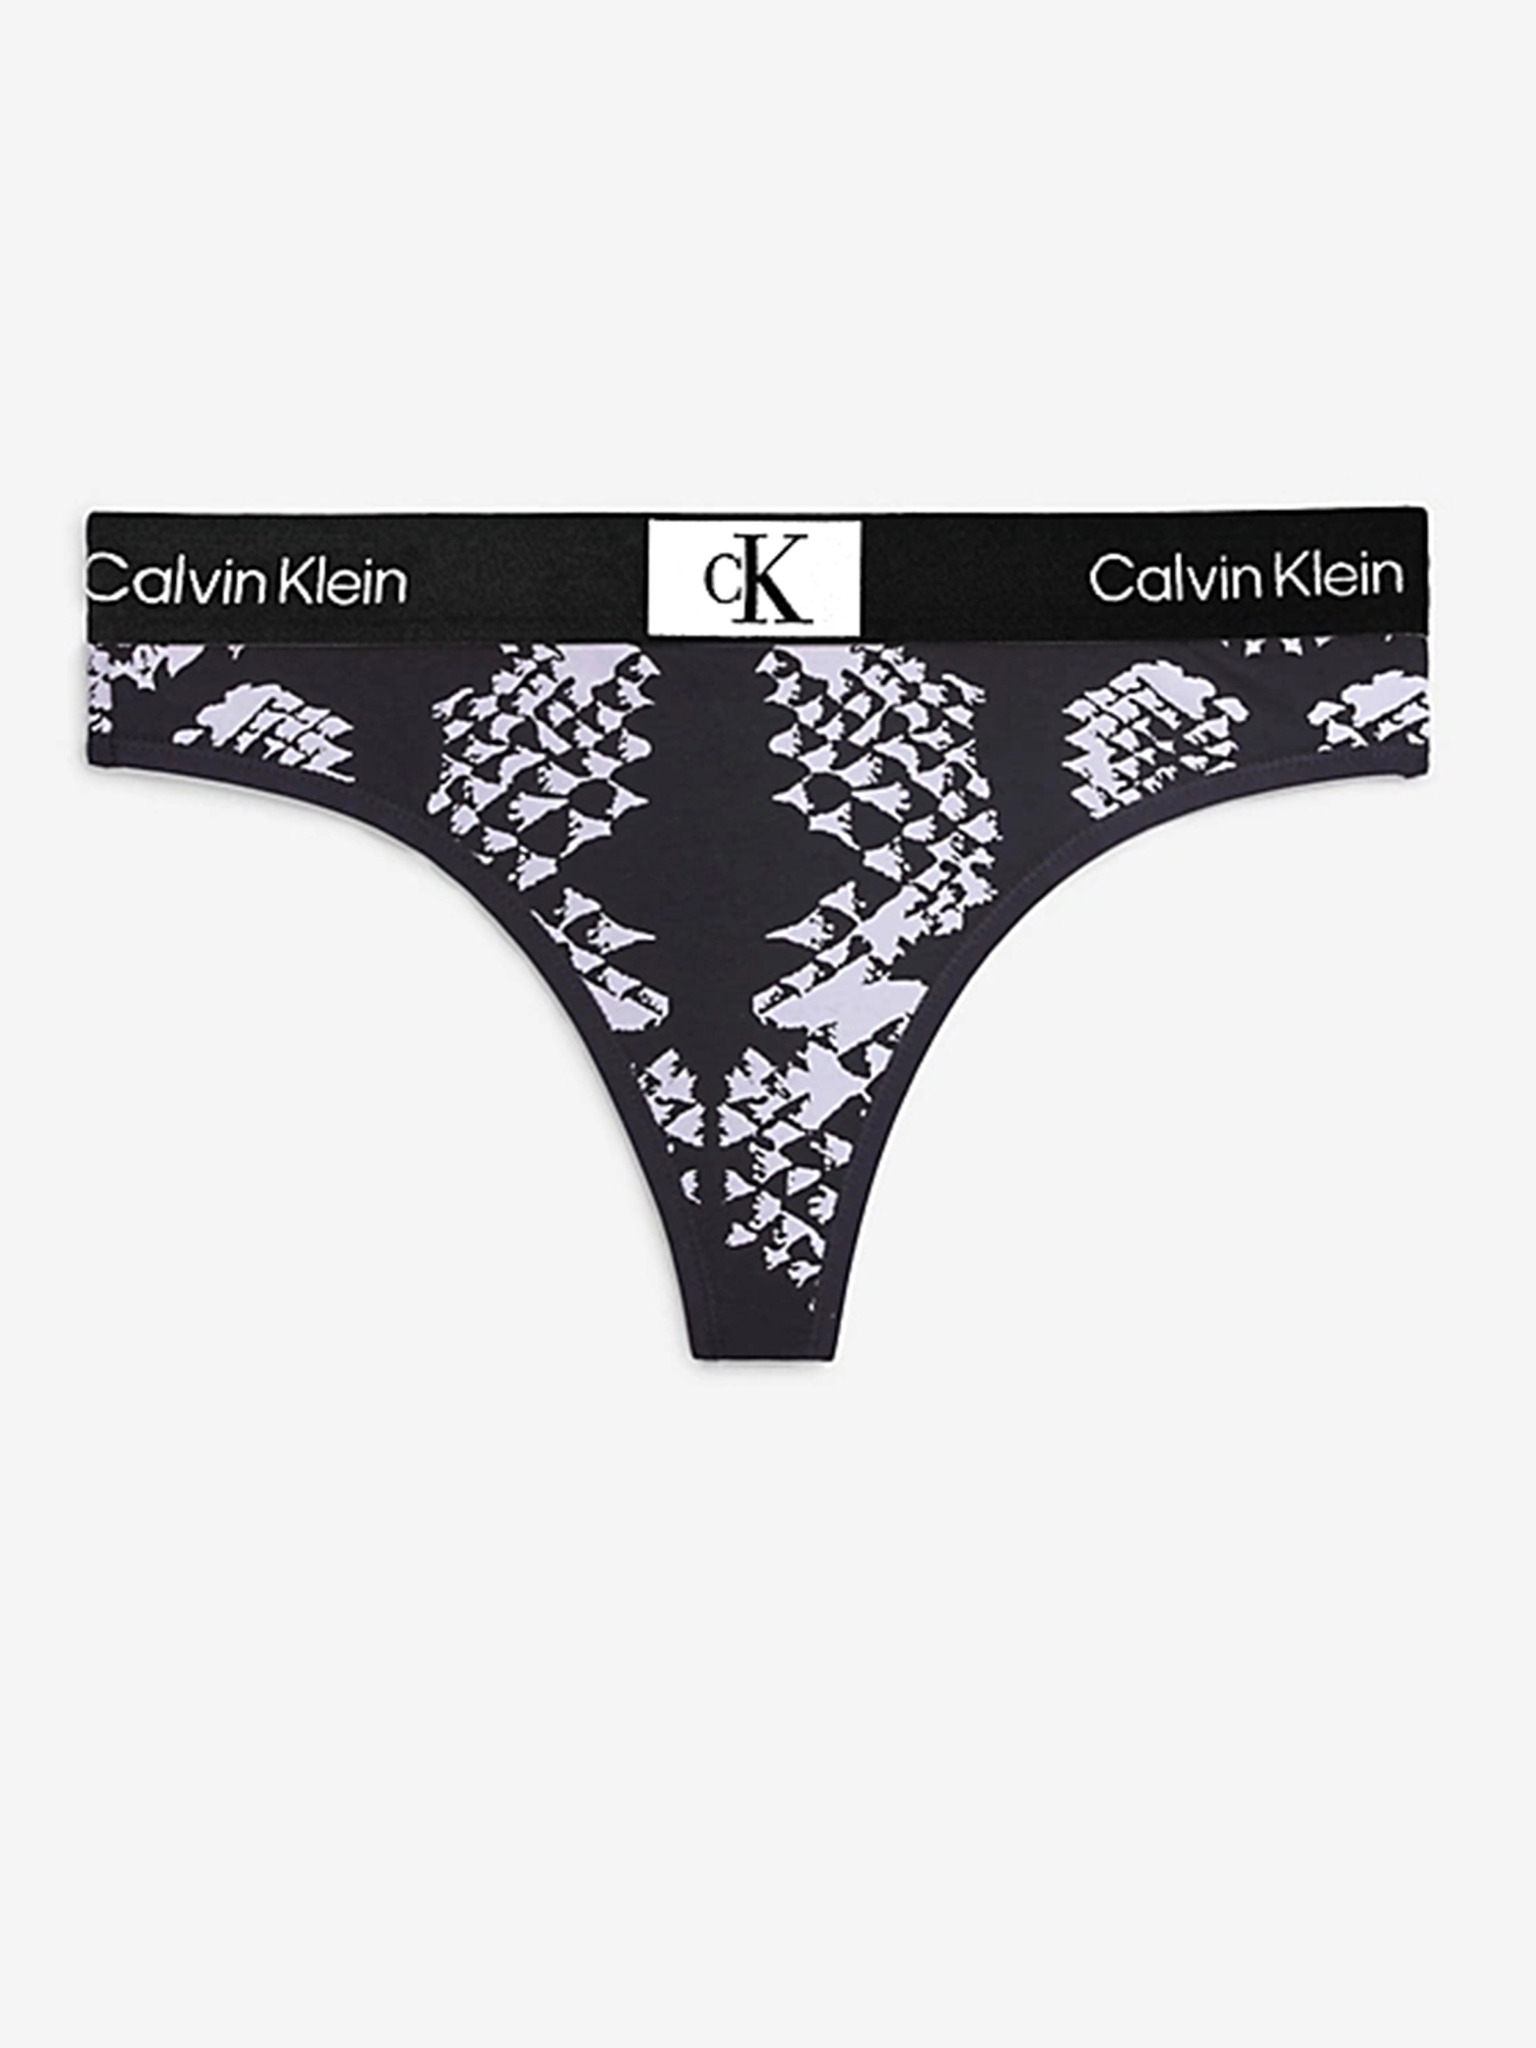 Recycled lace knickers, black, Calvin Klein Underwear